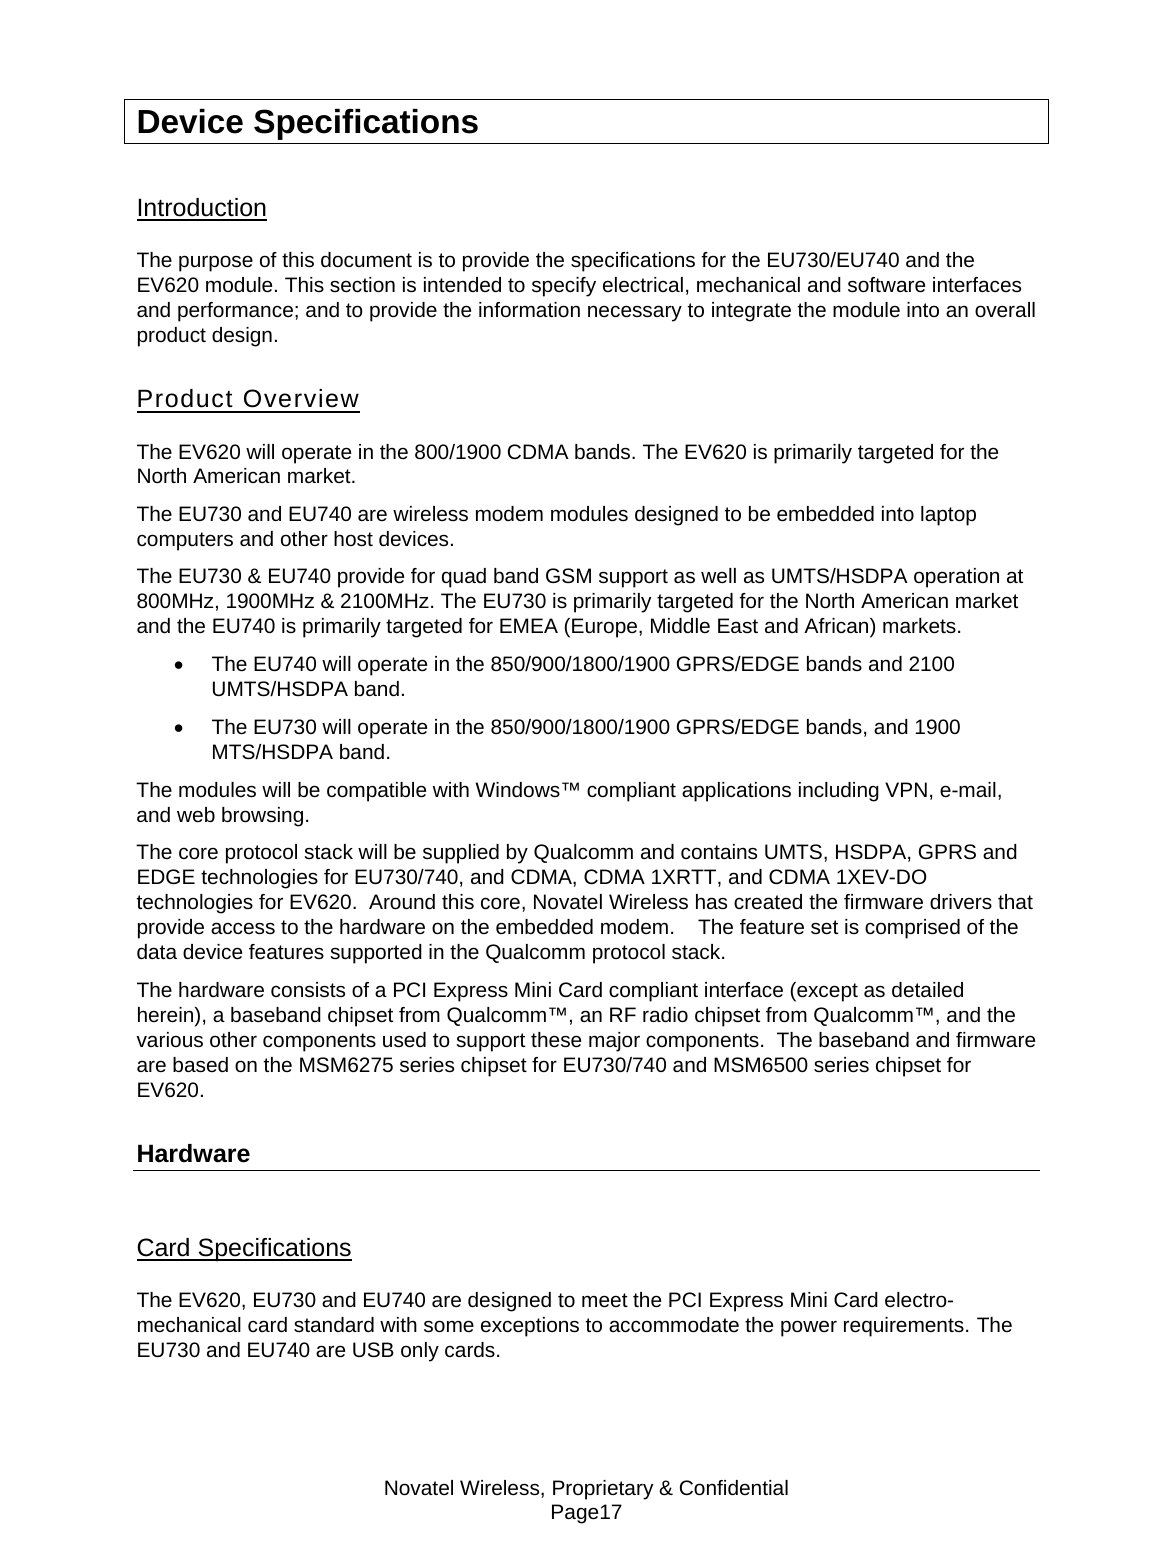 Novatel Wireless, Proprietary &amp; Confidential Page17 Device Specifications Introduction The purpose of this document is to provide the specifications for the EU730/EU740 and the EV620 module. This section is intended to specify electrical, mechanical and software interfaces and performance; and to provide the information necessary to integrate the module into an overall product design. Product Overview The EV620 will operate in the 800/1900 CDMA bands. The EV620 is primarily targeted for the North American market. The EU730 and EU740 are wireless modem modules designed to be embedded into laptop computers and other host devices. The EU730 &amp; EU740 provide for quad band GSM support as well as UMTS/HSDPA operation at 800MHz, 1900MHz &amp; 2100MHz. The EU730 is primarily targeted for the North American market and the EU740 is primarily targeted for EMEA (Europe, Middle East and African) markets. •  The EU740 will operate in the 850/900/1800/1900 GPRS/EDGE bands and 2100 UMTS/HSDPA band.  •  The EU730 will operate in the 850/900/1800/1900 GPRS/EDGE bands, and 1900 MTS/HSDPA band.  The modules will be compatible with Windows™ compliant applications including VPN, e-mail, and web browsing.  The core protocol stack will be supplied by Qualcomm and contains UMTS, HSDPA, GPRS and EDGE technologies for EU730/740, and CDMA, CDMA 1XRTT, and CDMA 1XEV-DO technologies for EV620.  Around this core, Novatel Wireless has created the firmware drivers that provide access to the hardware on the embedded modem.    The feature set is comprised of the data device features supported in the Qualcomm protocol stack.  The hardware consists of a PCI Express Mini Card compliant interface (except as detailed herein), a baseband chipset from Qualcomm™, an RF radio chipset from Qualcomm™, and the various other components used to support these major components.  The baseband and firmware are based on the MSM6275 series chipset for EU730/740 and MSM6500 series chipset for EV620. Hardware    Card Specifications The EV620, EU730 and EU740 are designed to meet the PCI Express Mini Card electro-mechanical card standard with some exceptions to accommodate the power requirements. The EU730 and EU740 are USB only cards. 